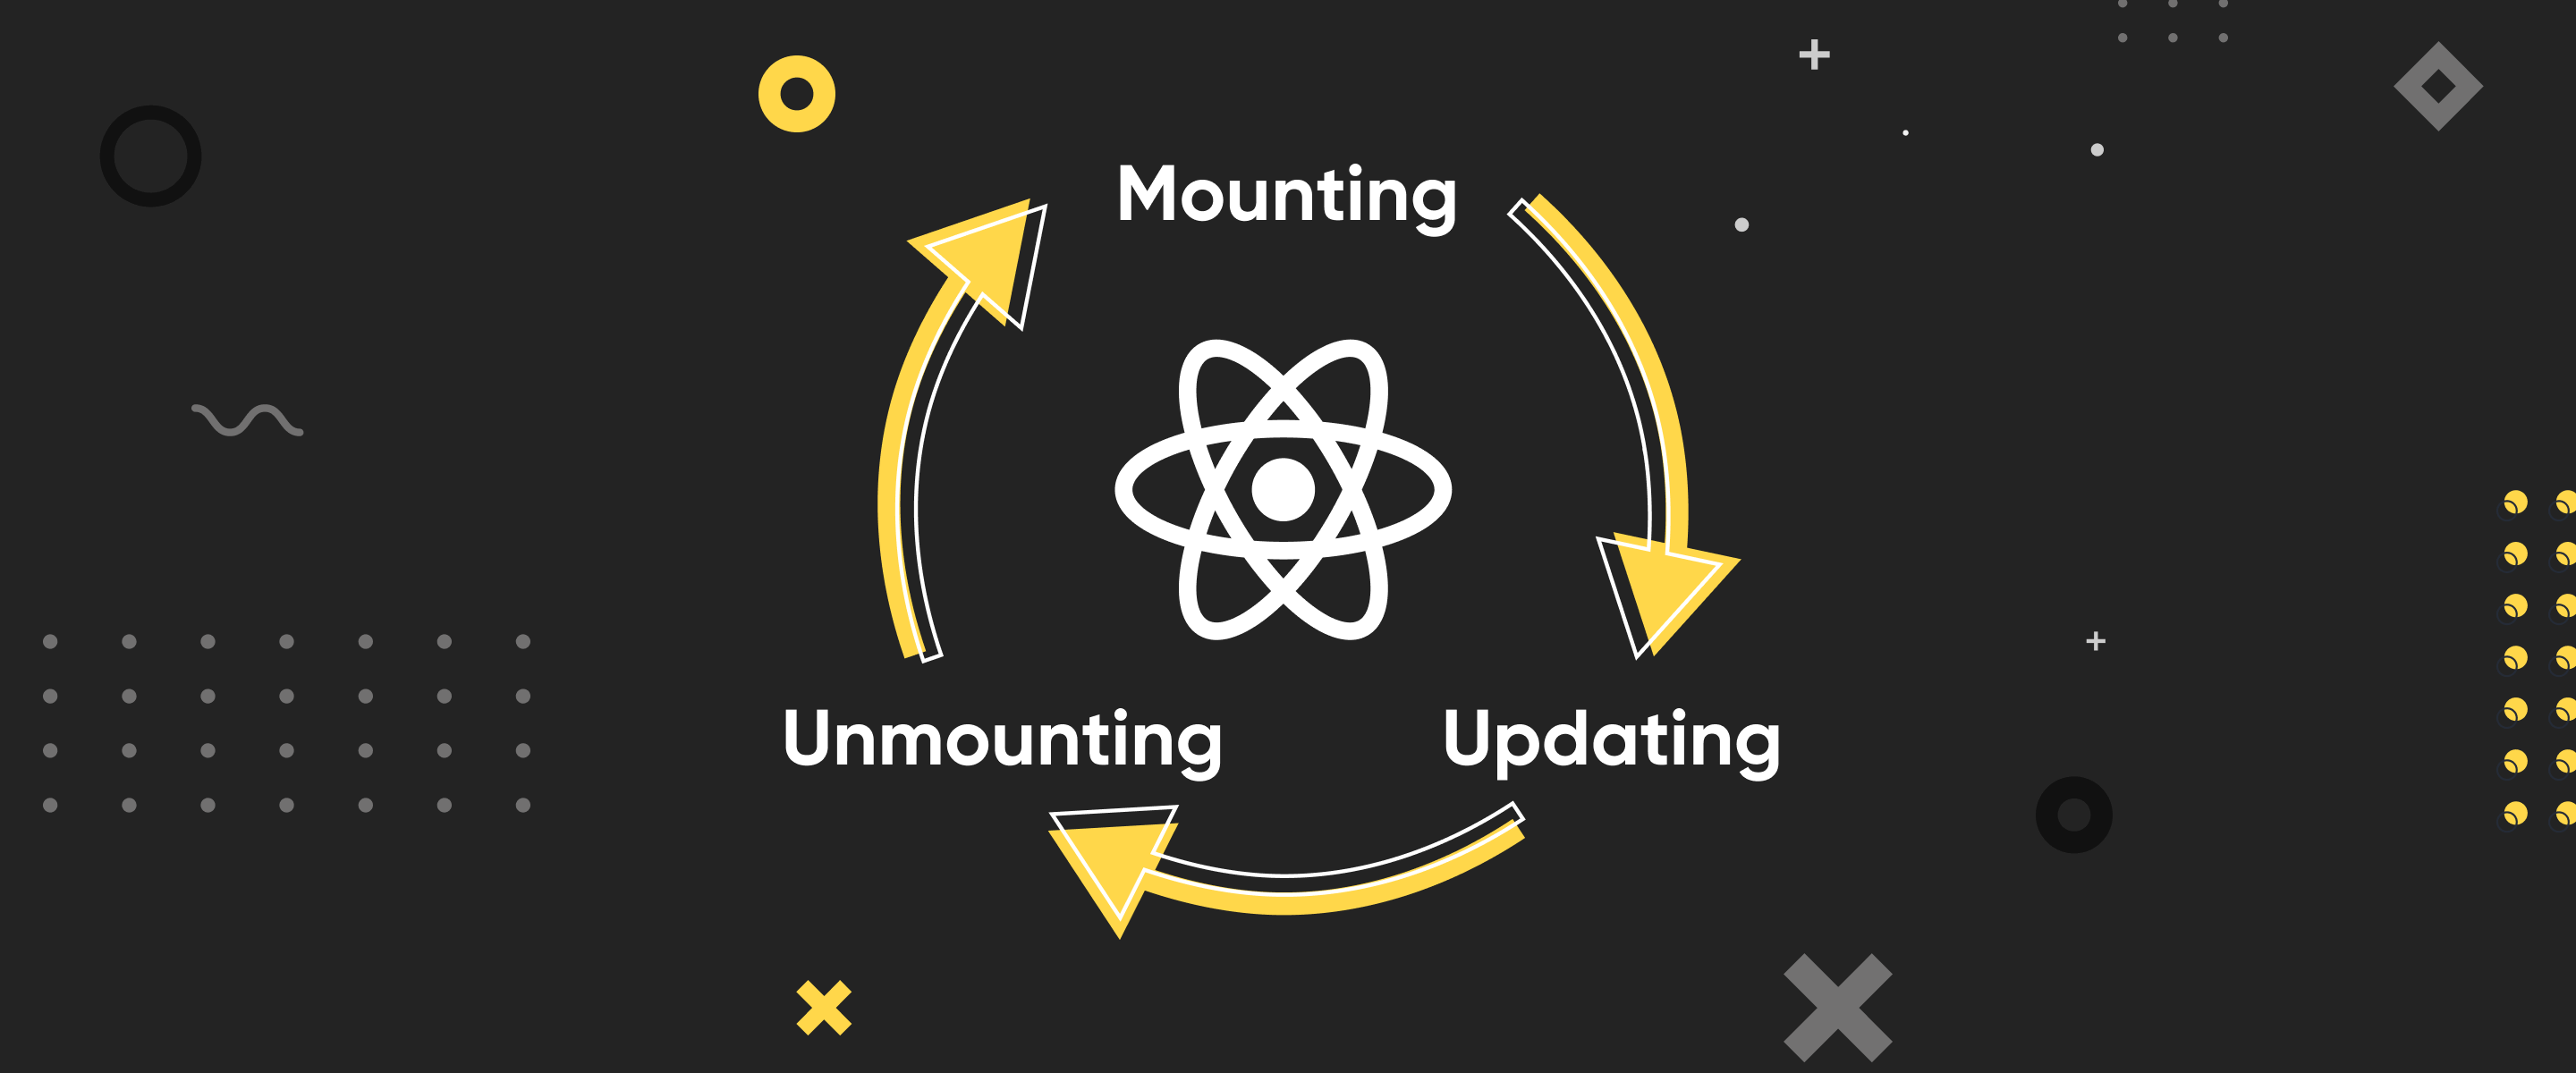 React.js Basics – The DOM, Components, and Declarative Views Explained